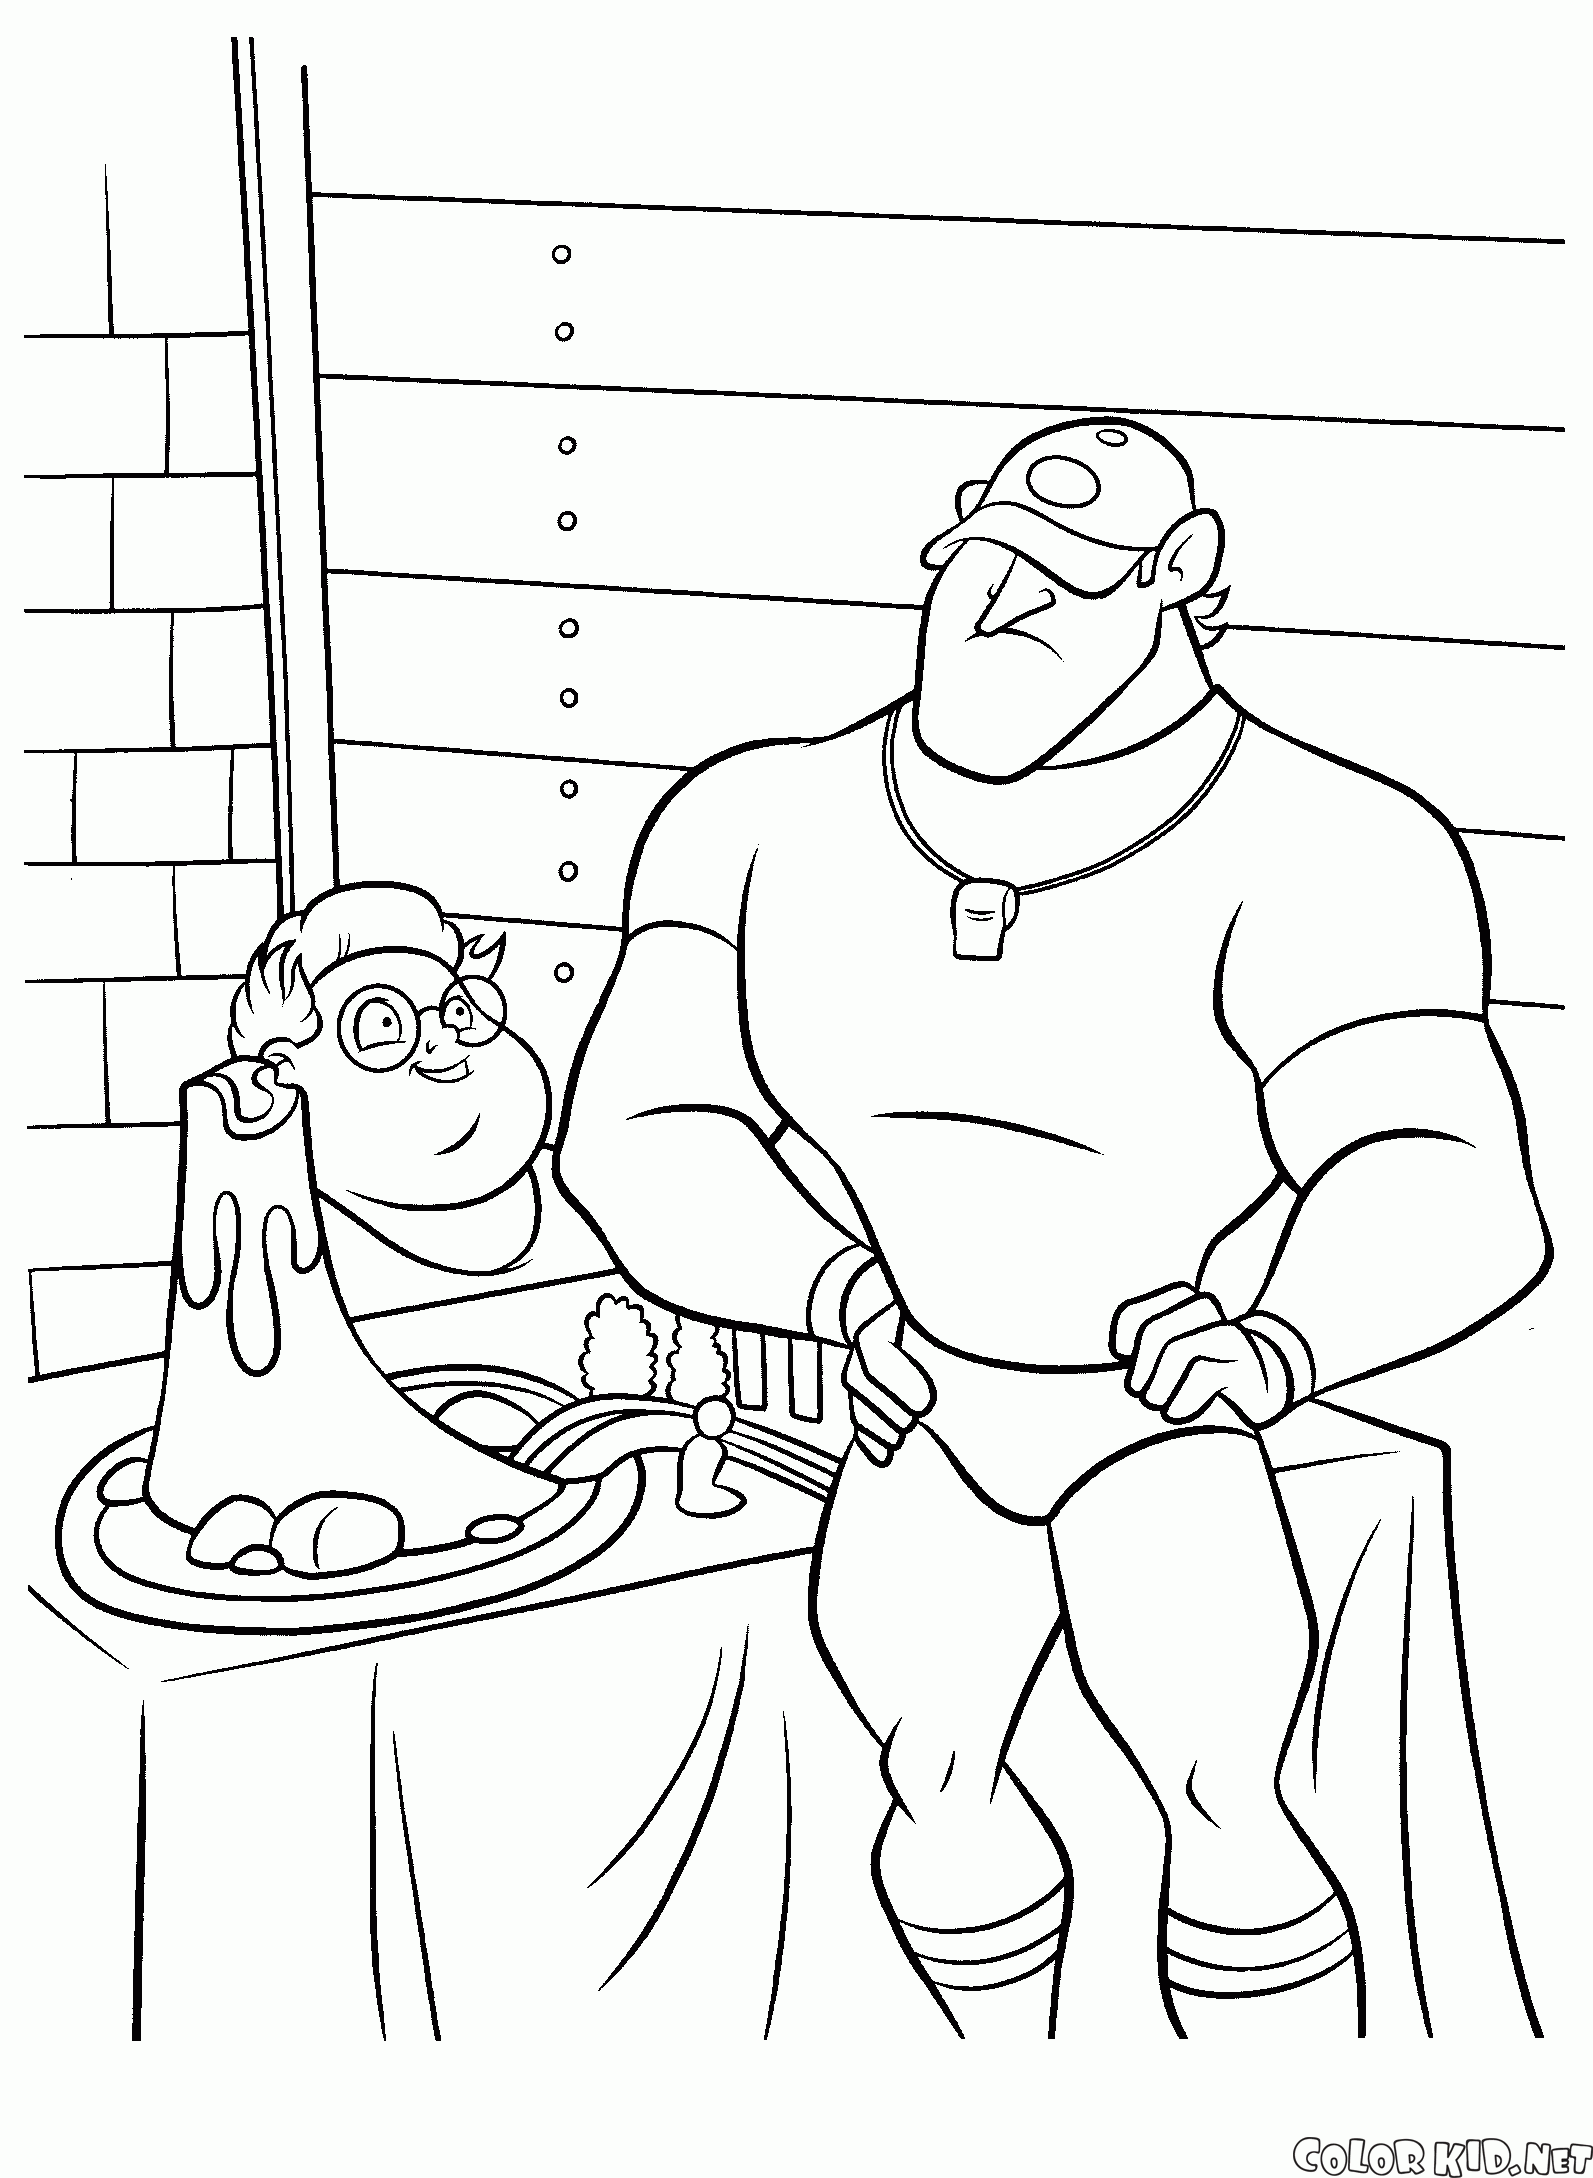 Coloring page - Meet the Robinsons